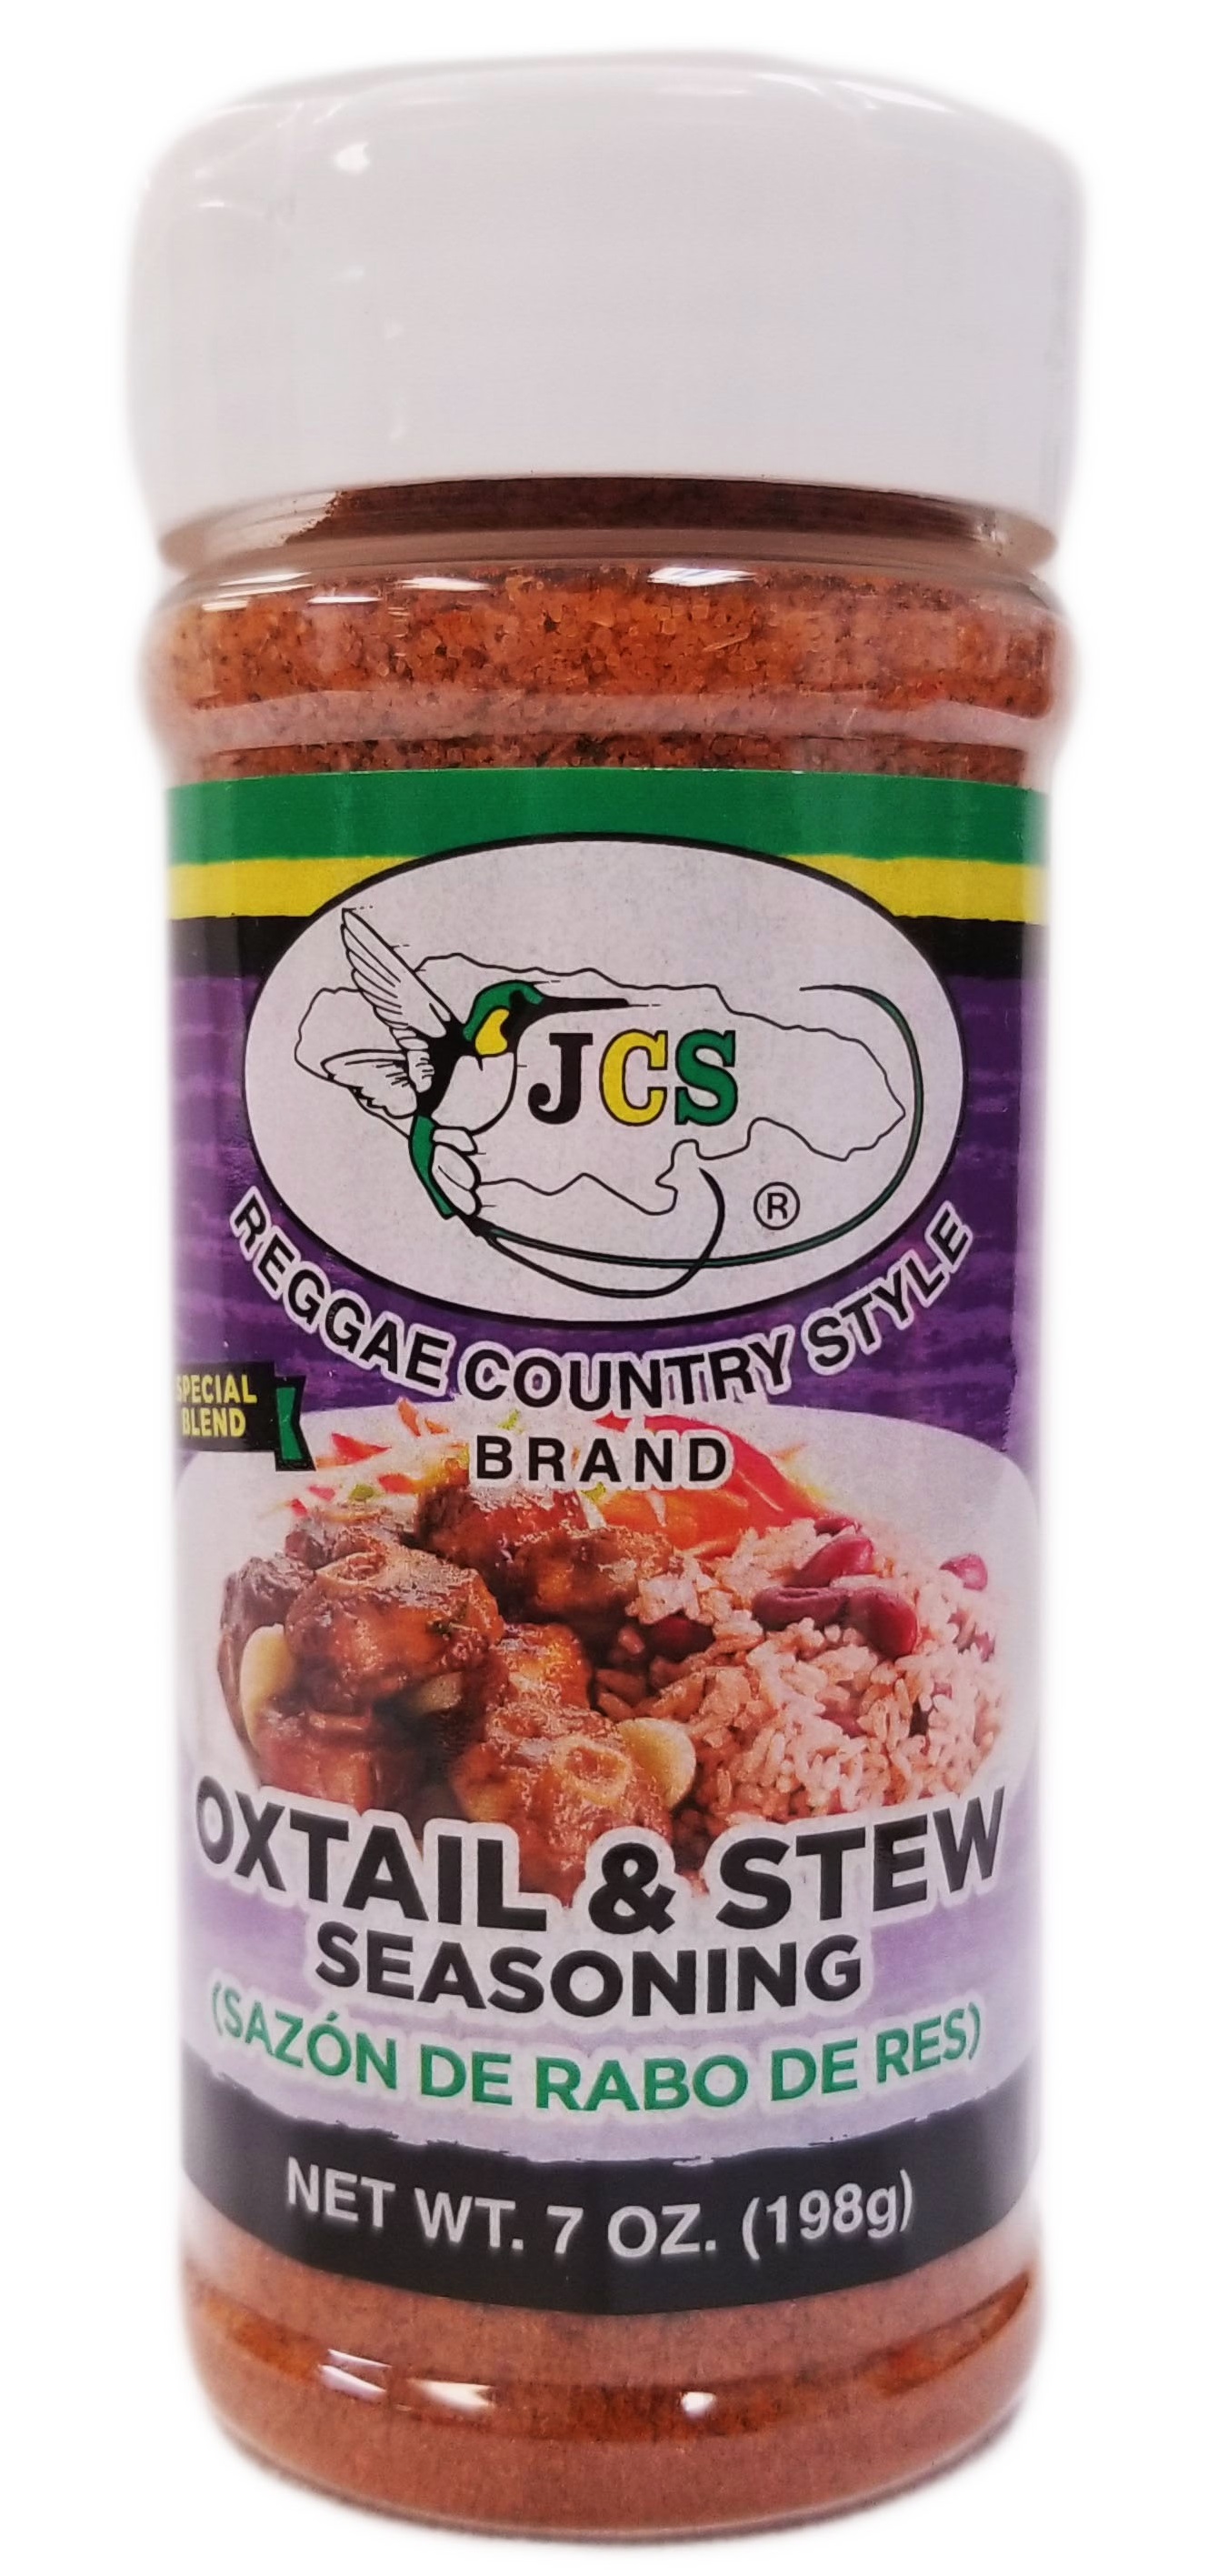 Oxtail & Stew Seasoning 7oz - Jamaican Oxtail - Jamaican Country Style